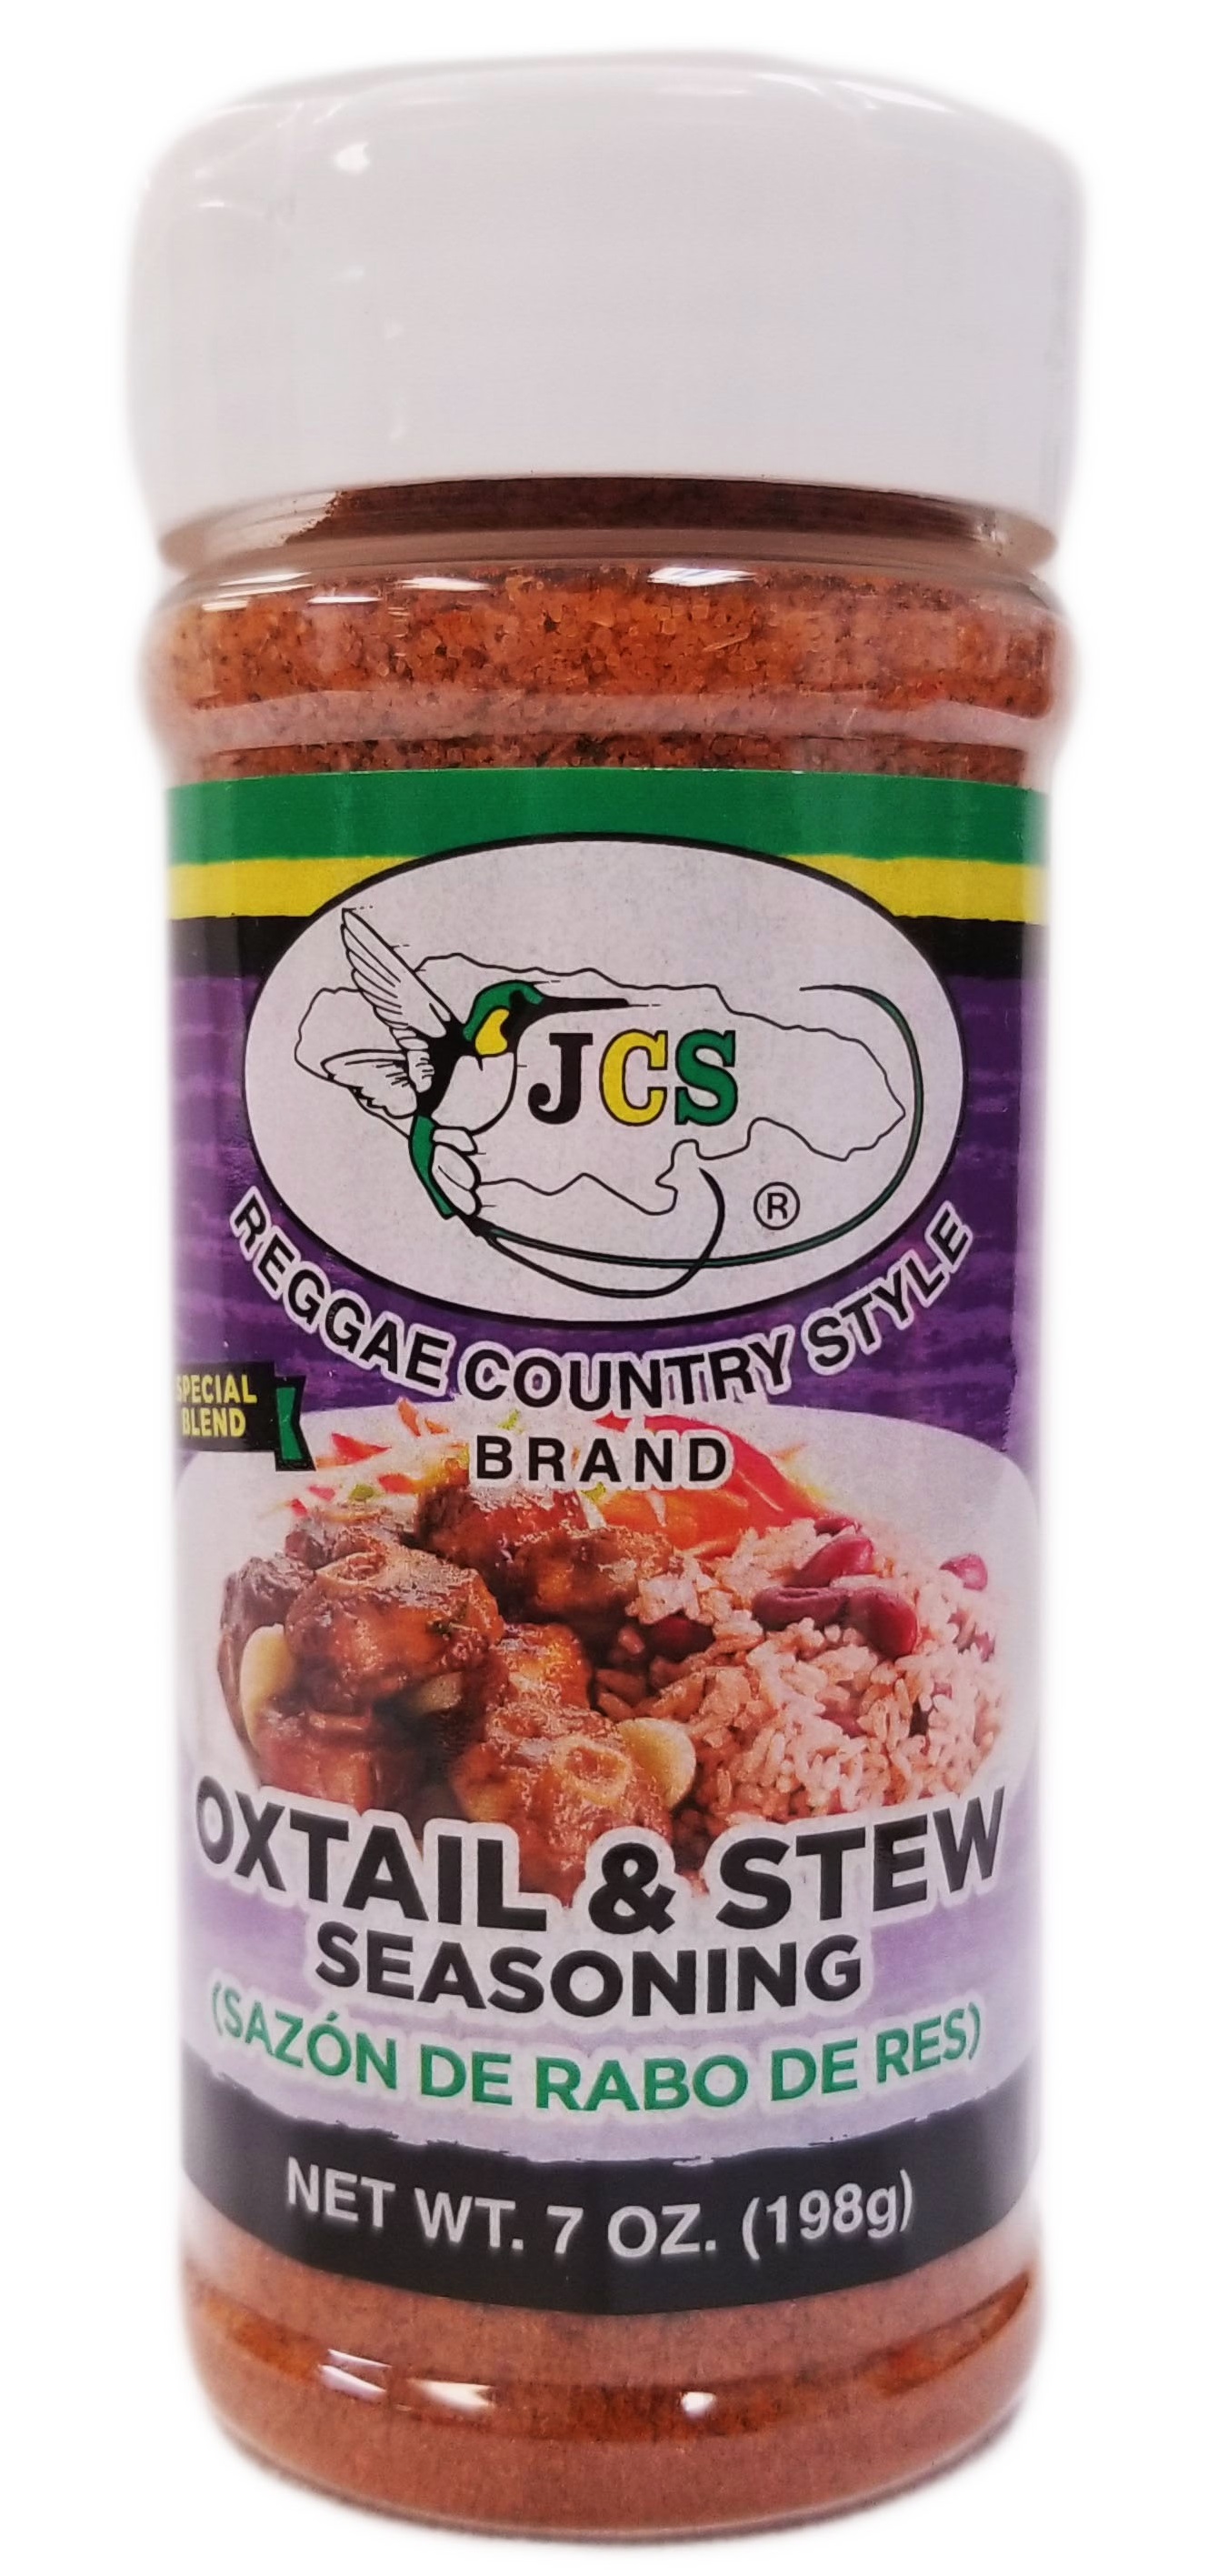 Oxtail & Stew Seasoning 7oz - Jamaican Oxtail - Jamaican Country Style